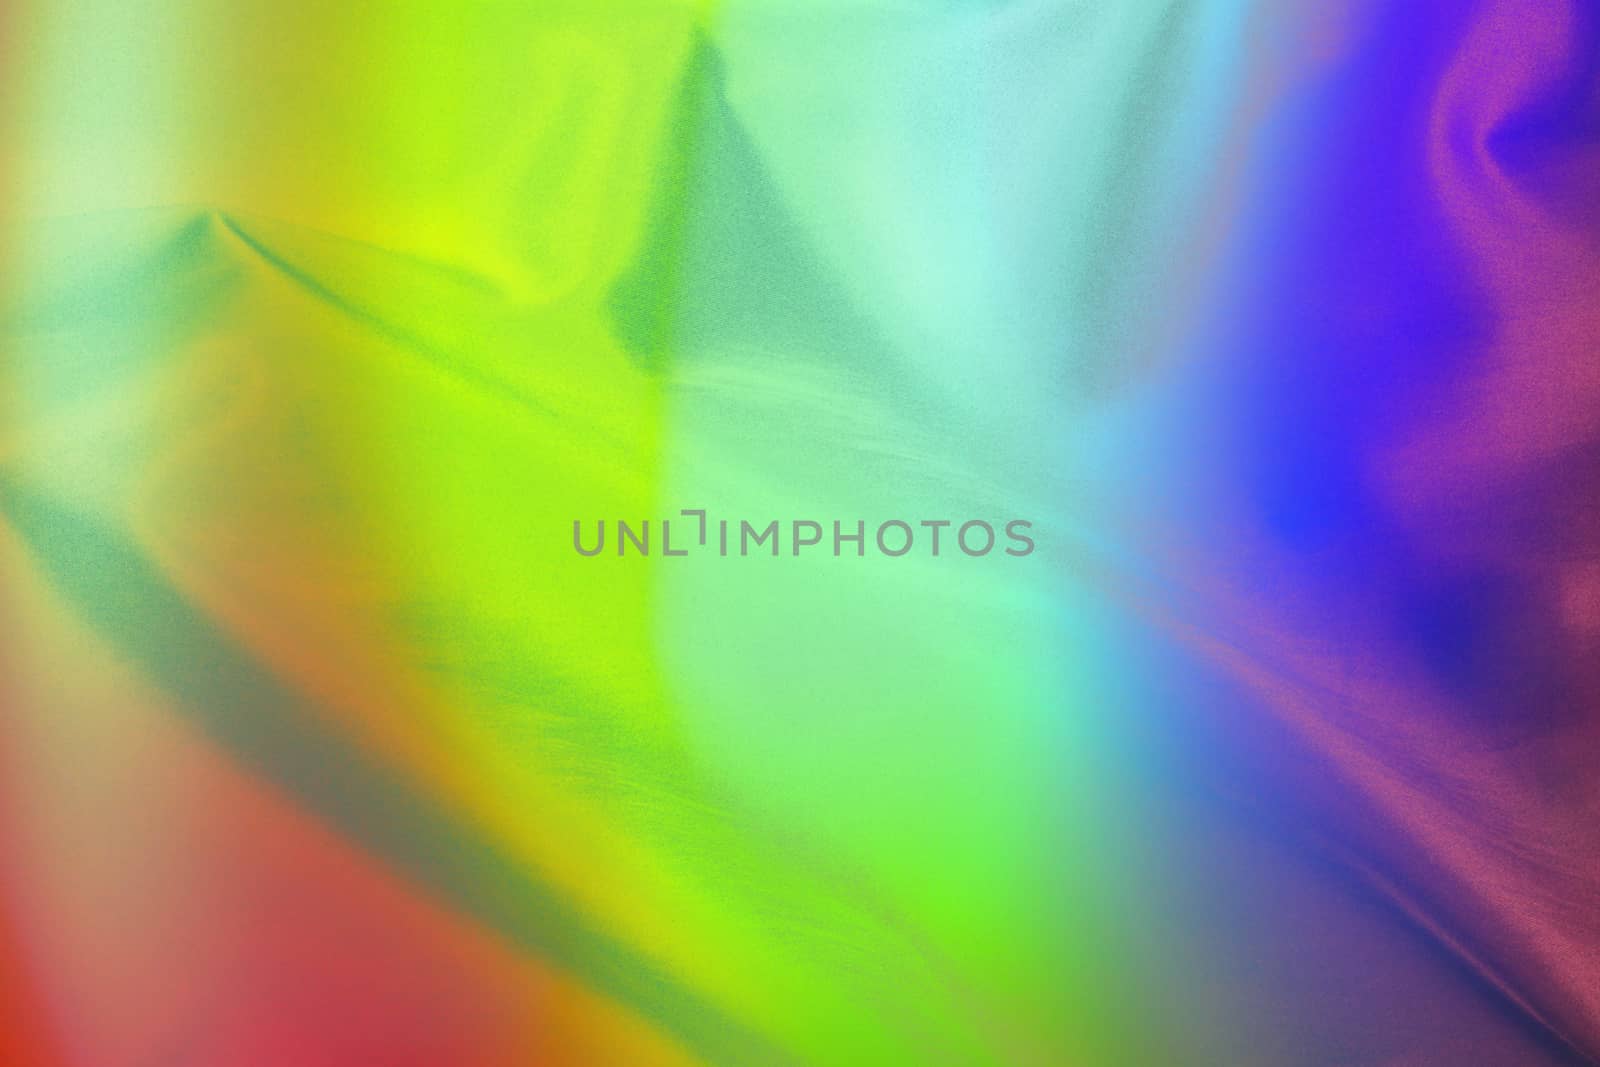 An abstract background of a soft satin cloth in rainbow colors